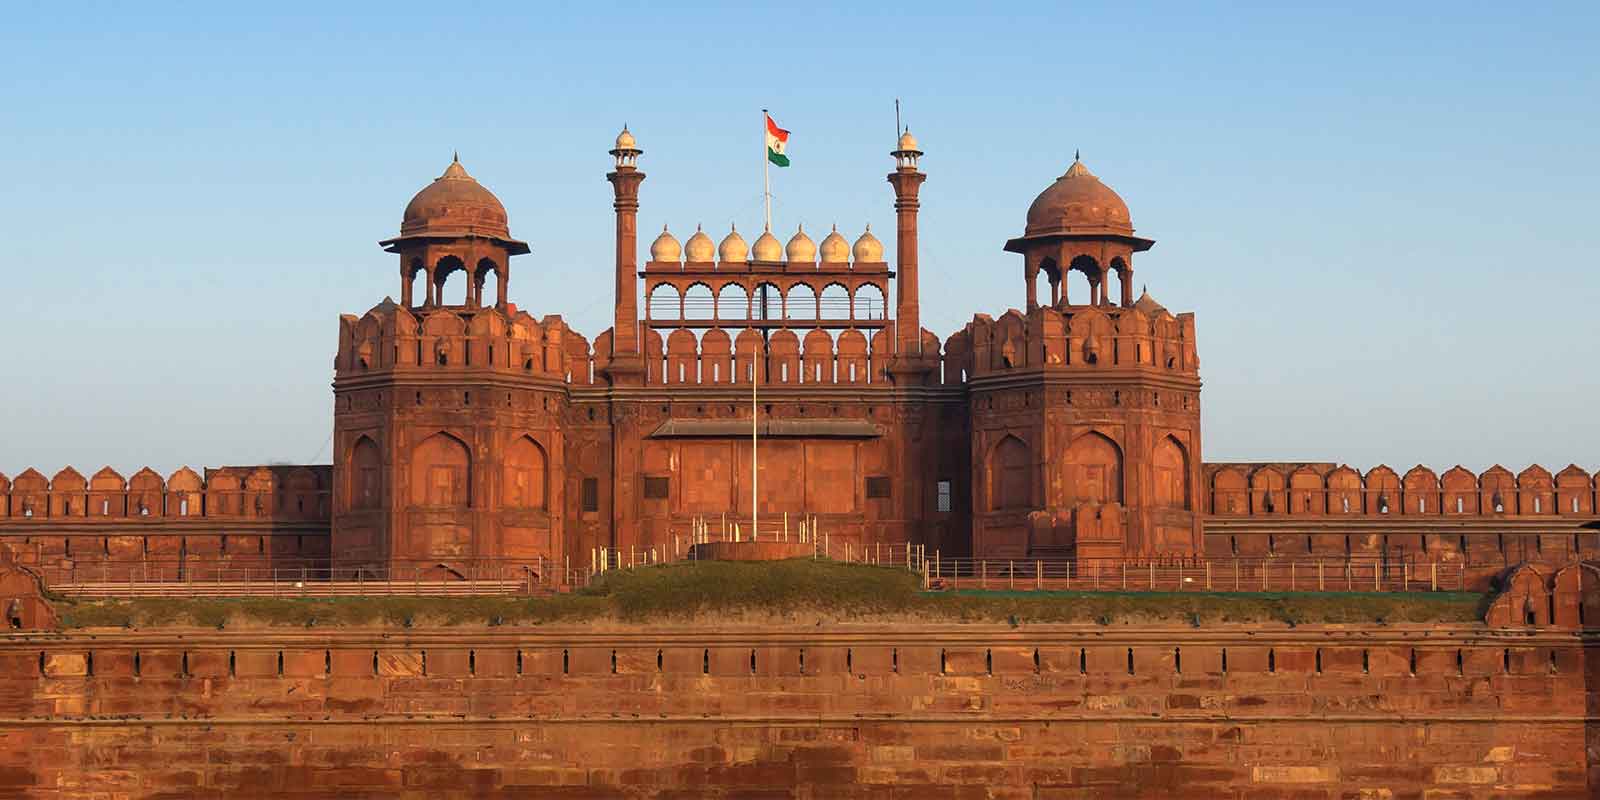 View of the Red Fort exterior